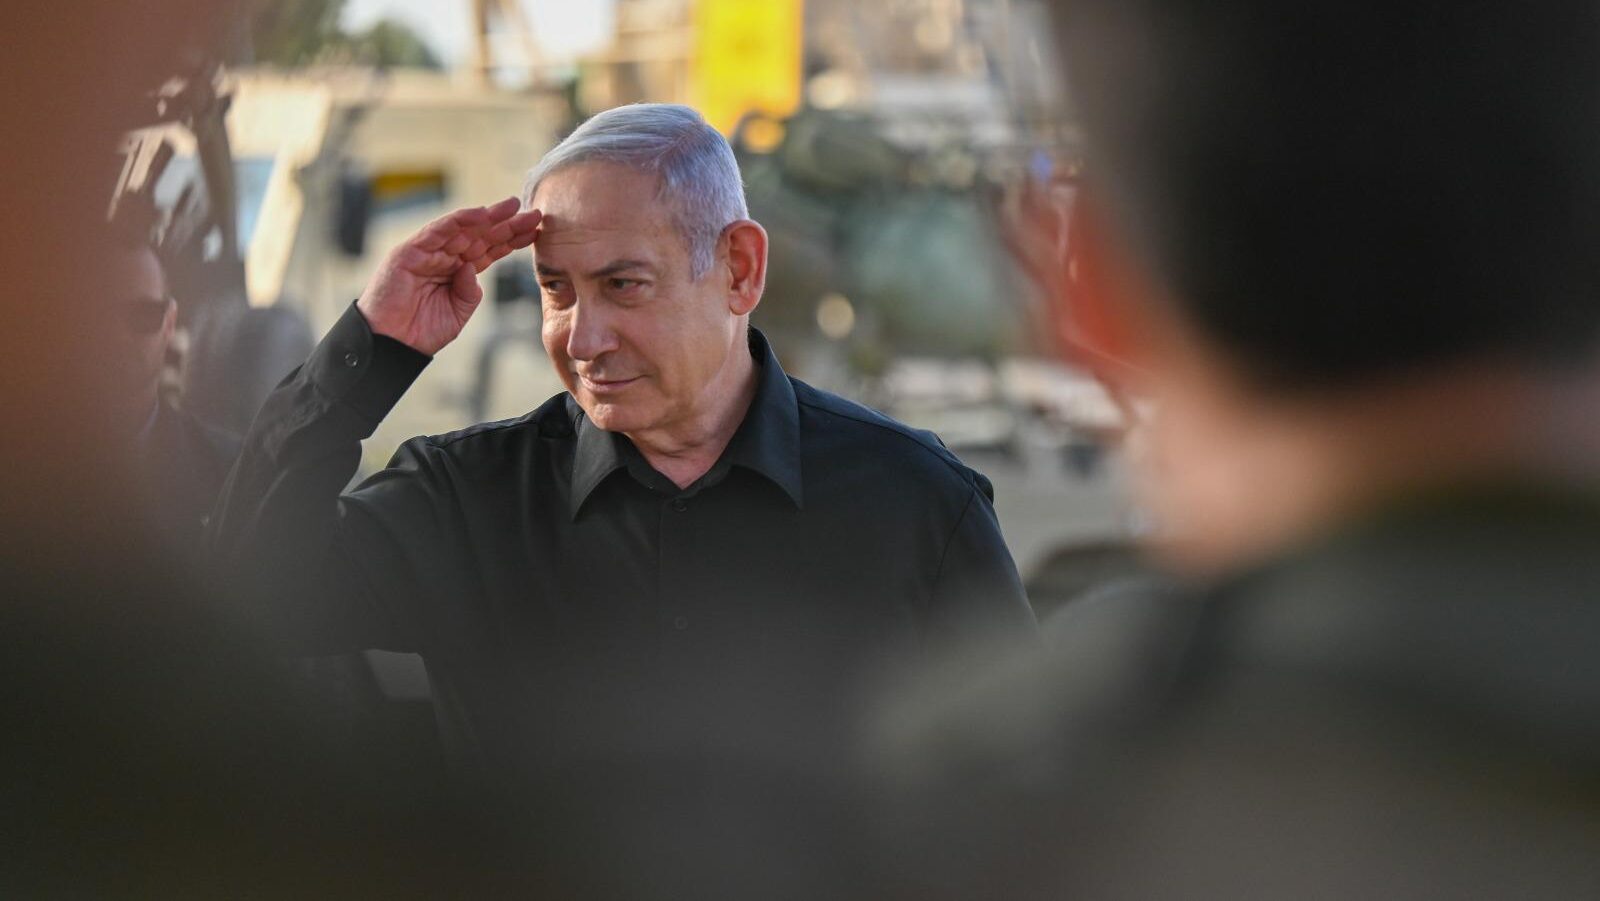 Israel’s Netanyahu Faces War While Fighting for His Political Survival